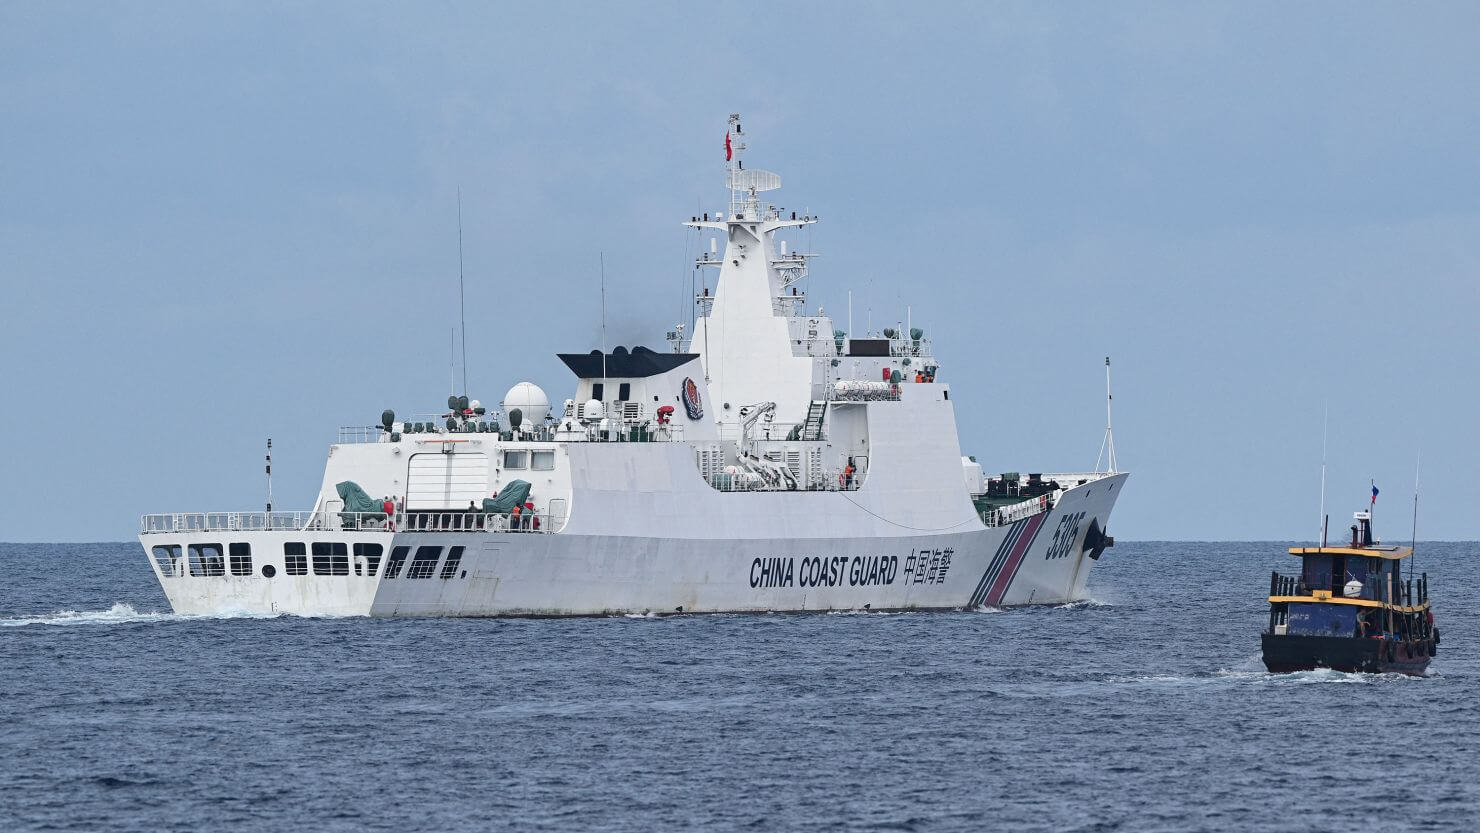 The Philippines’ Dilemma: Managing Tensions in the South China Sea